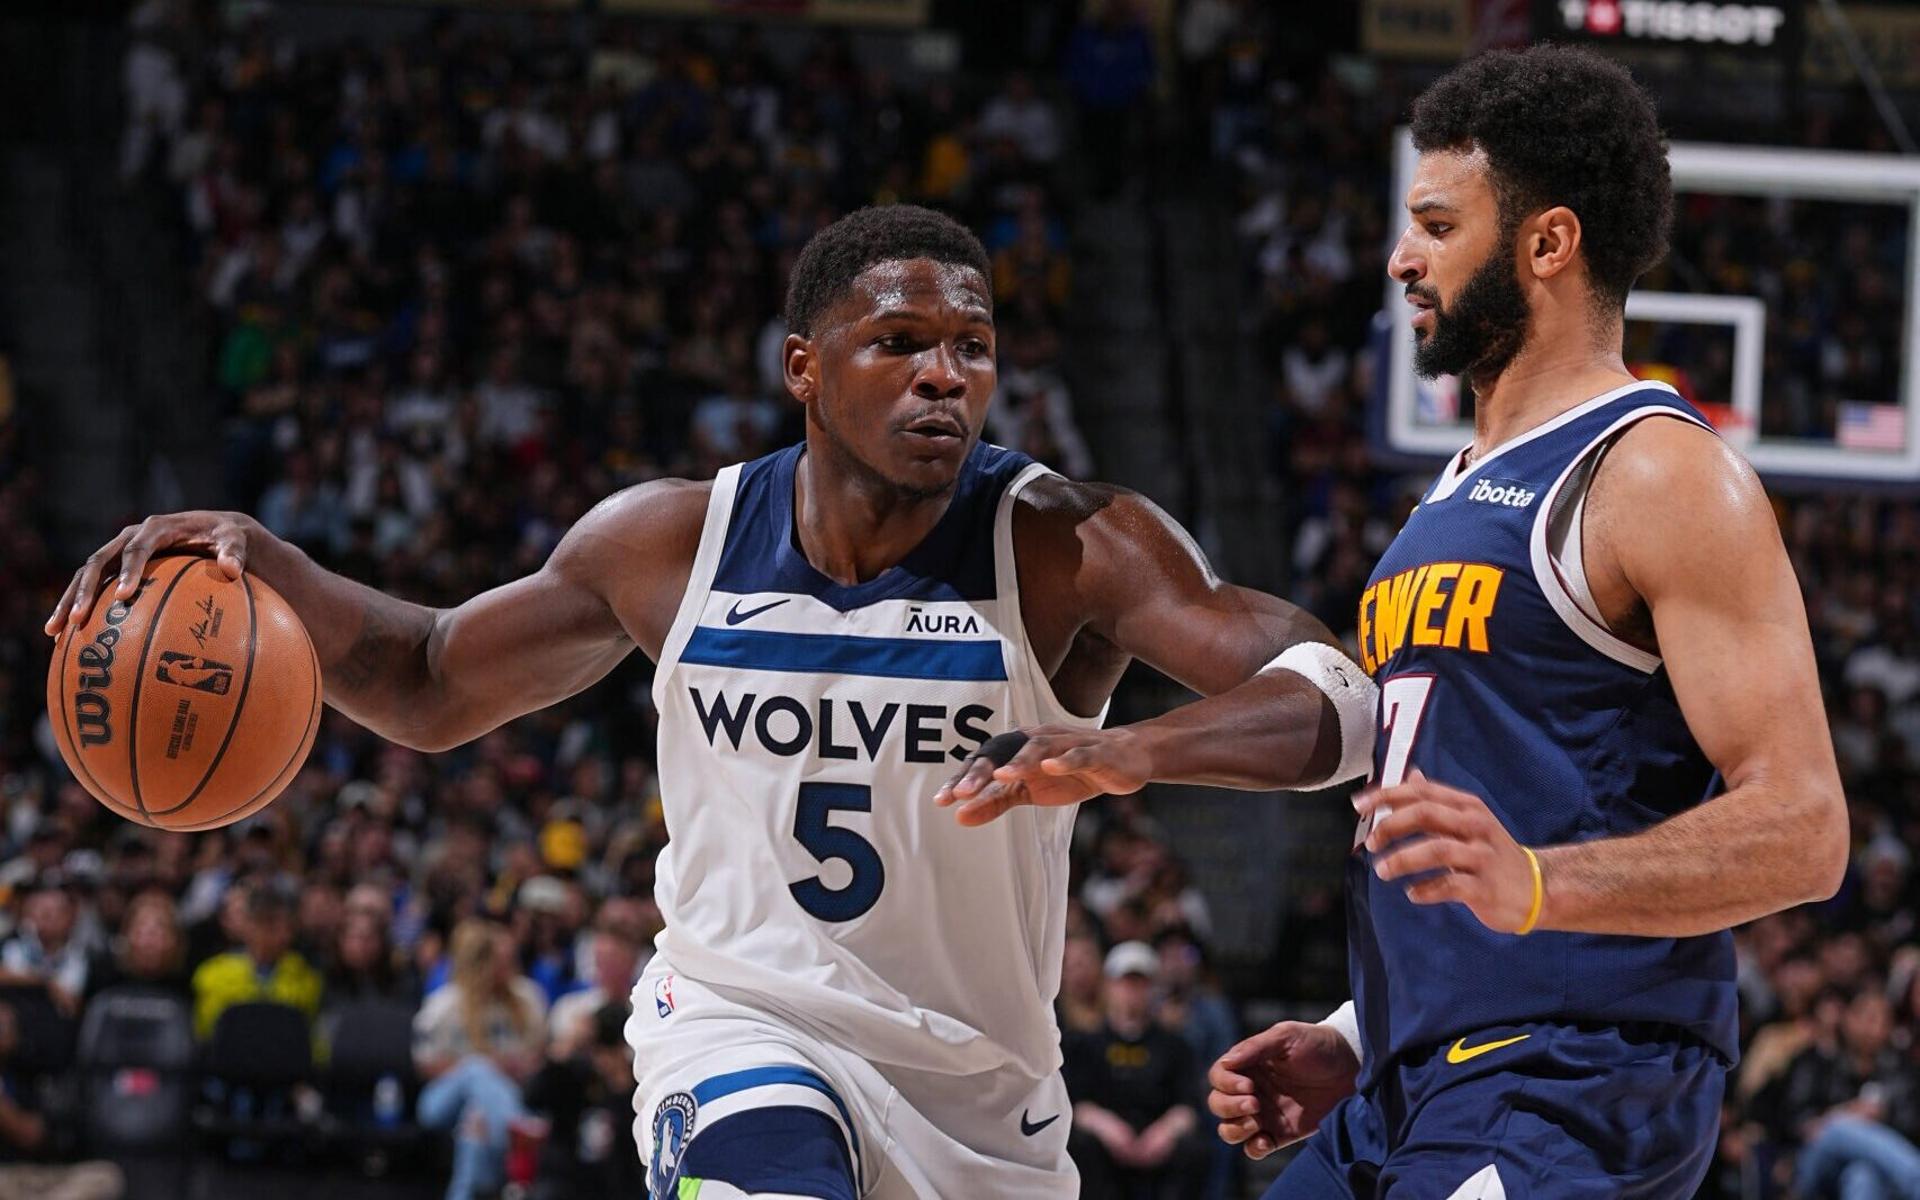 Nuggets-x-Timberwolves-2-scaled-aspect-ratio-512-320